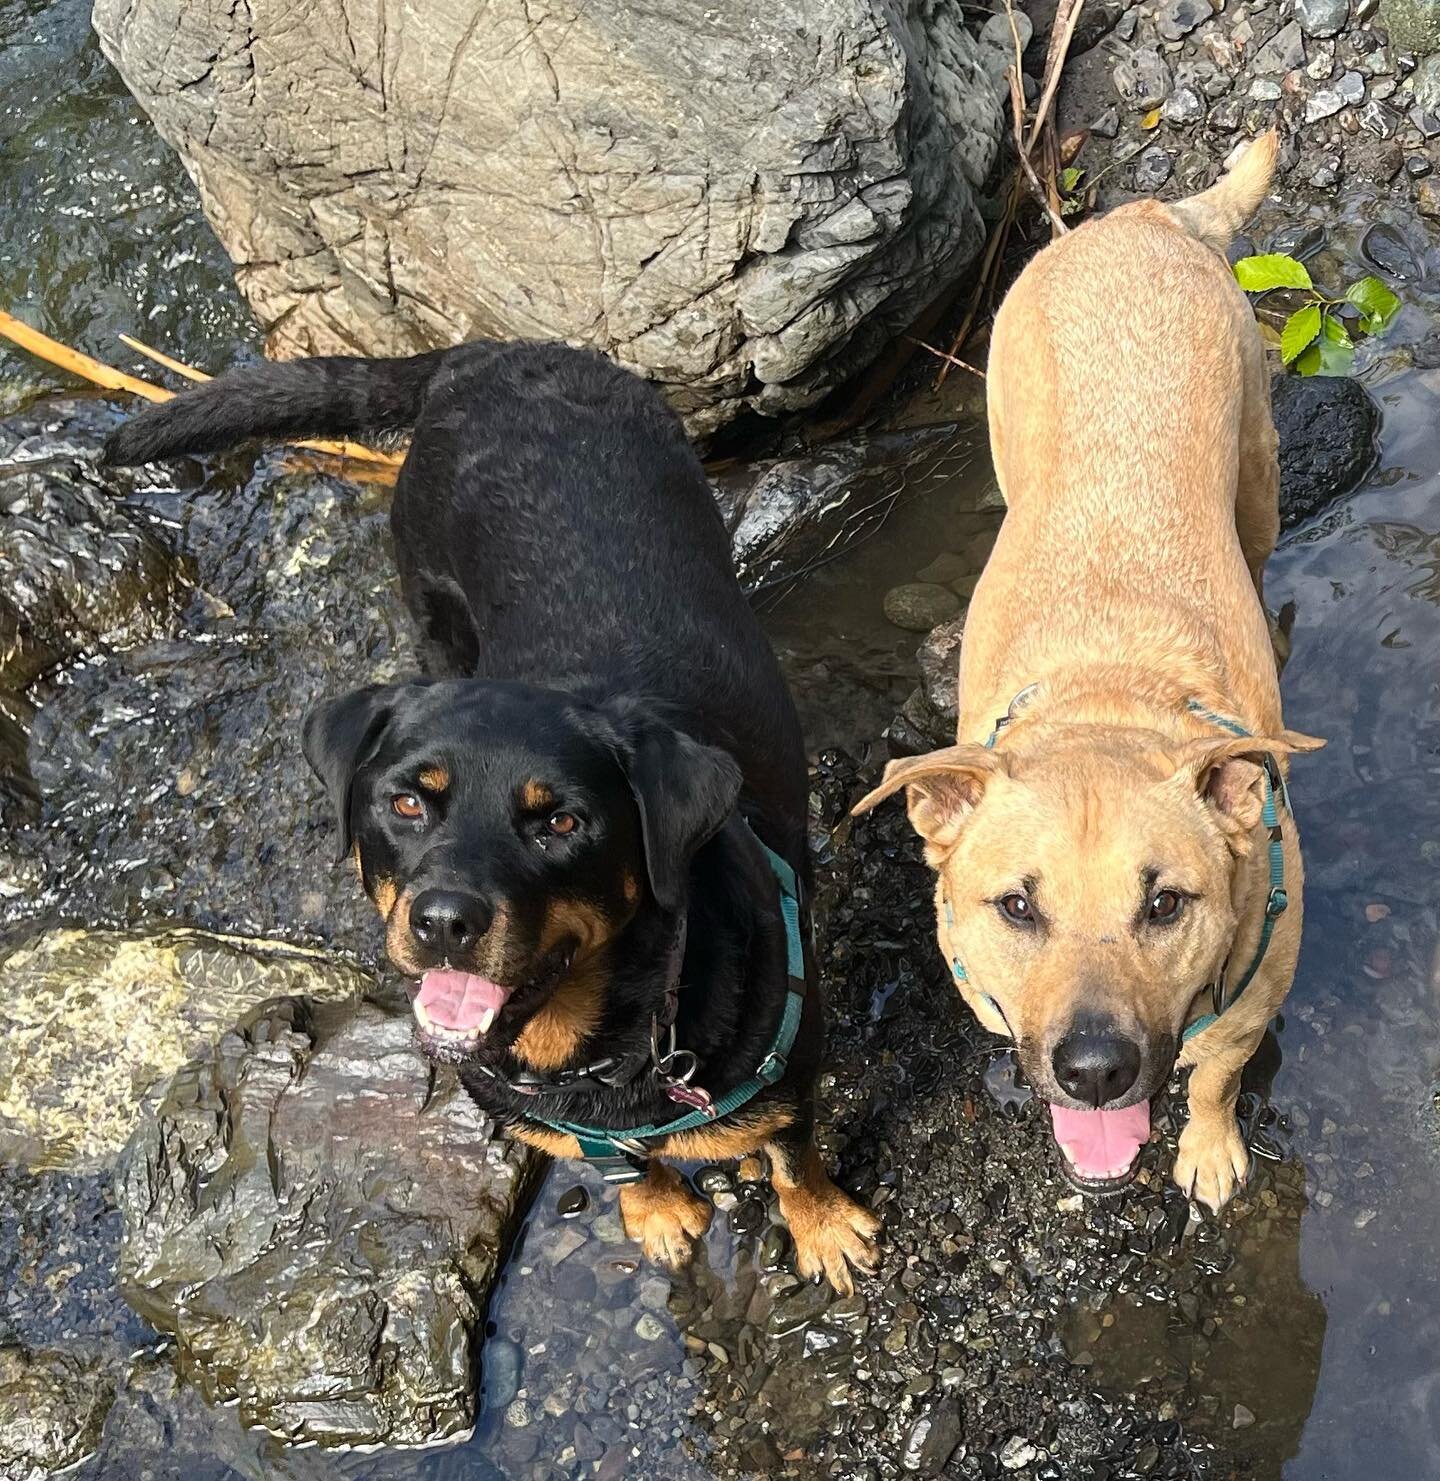 Happy International Dog Day from Rhonda and Stanley! They hope you all have the very best weekend full of swims, treads and belly rubs! 😉
.
.
.
.
#internationaldogday #adoptdontshop #rescuedog #happydogs #liveyourbestlife #dogsmiles